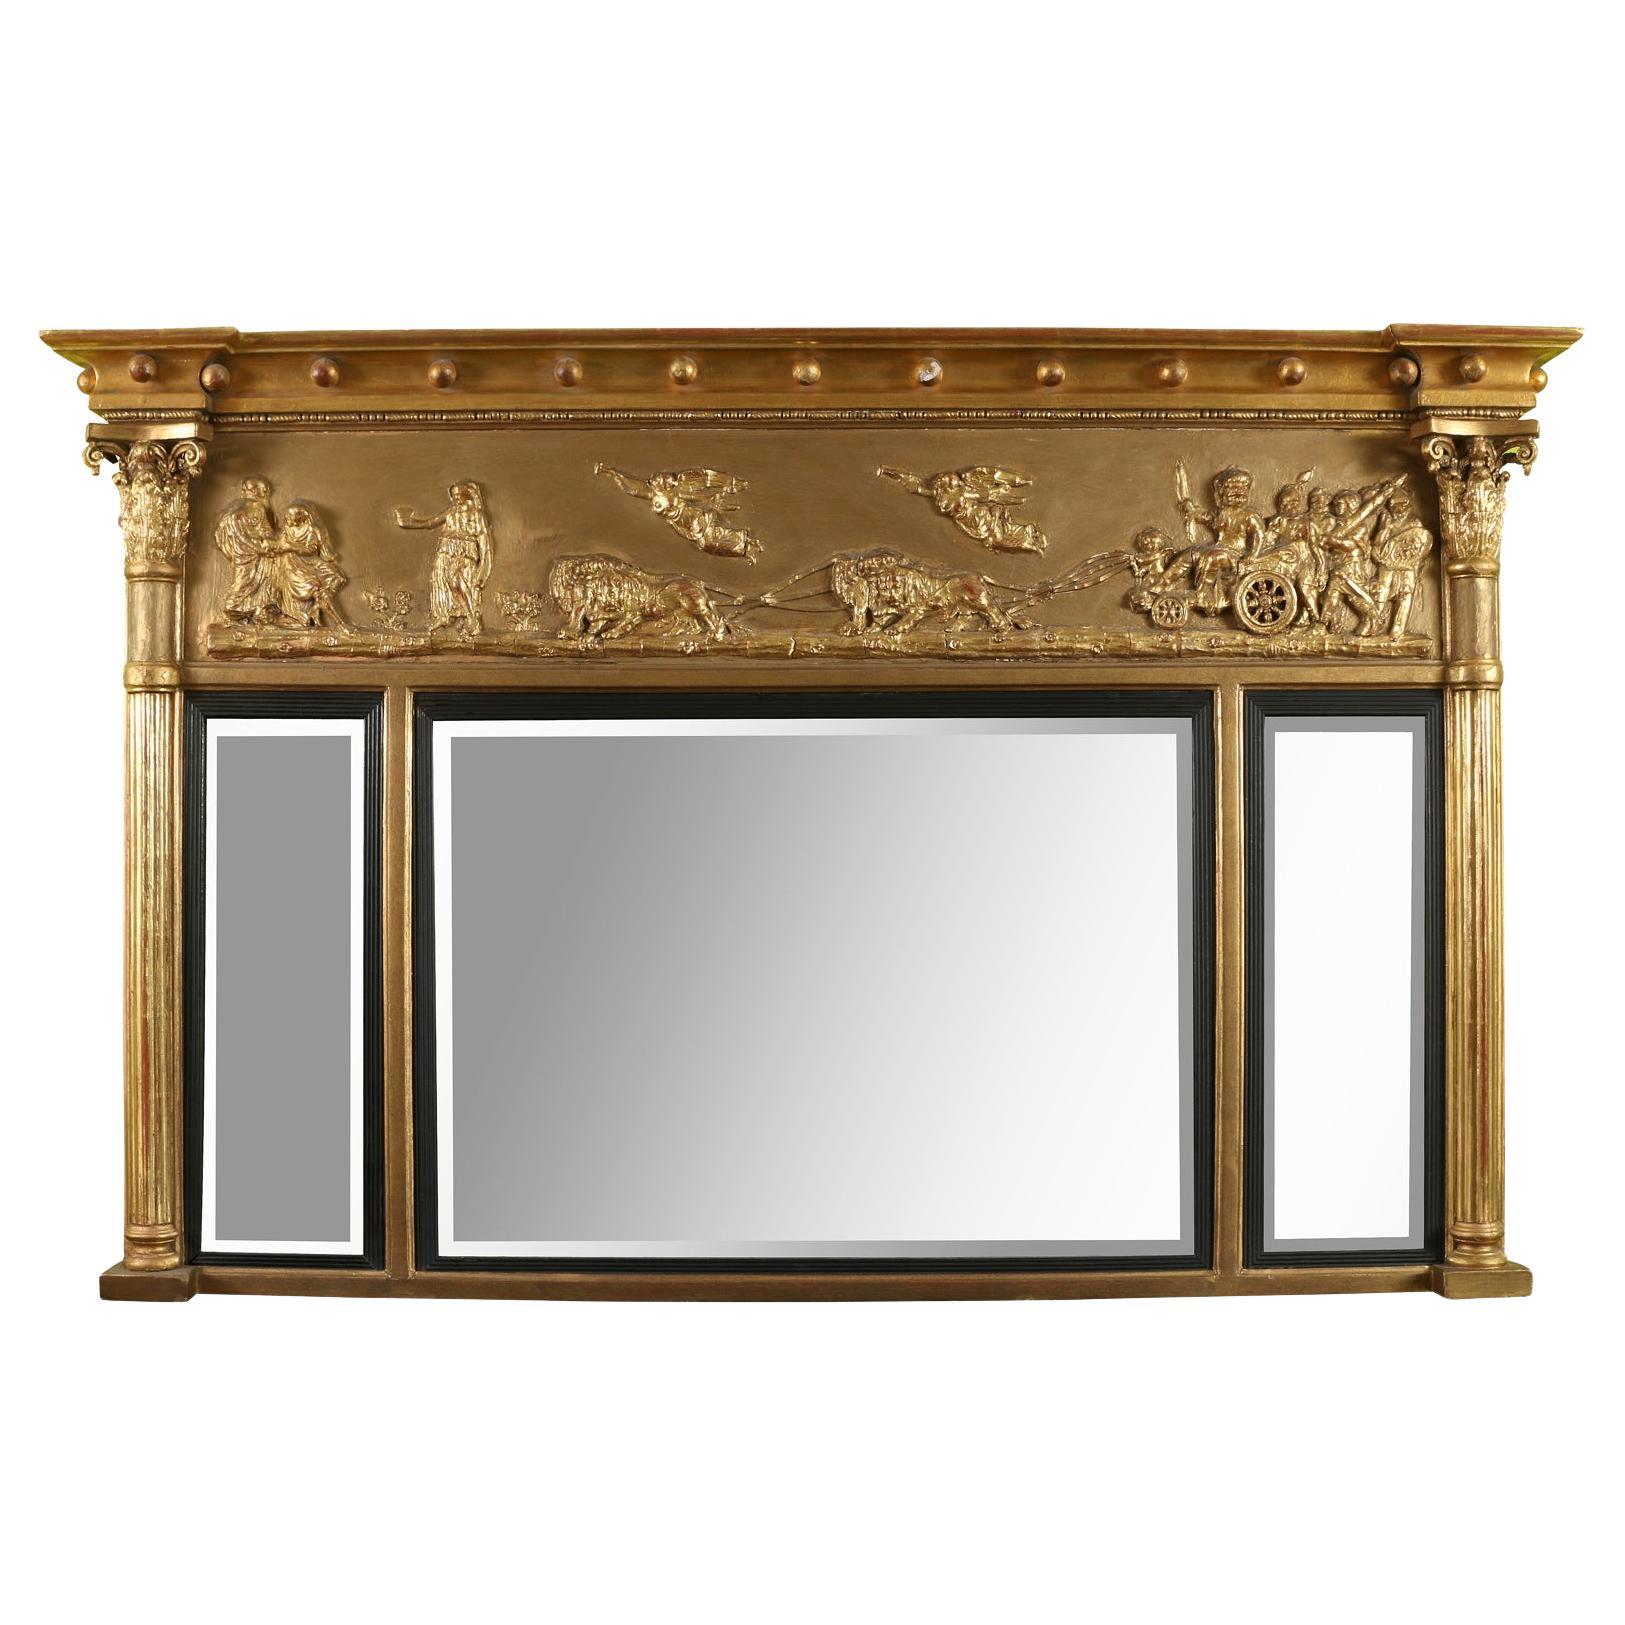 Giltwood English Regency Mirror with Neoclassical Scene  For Sale